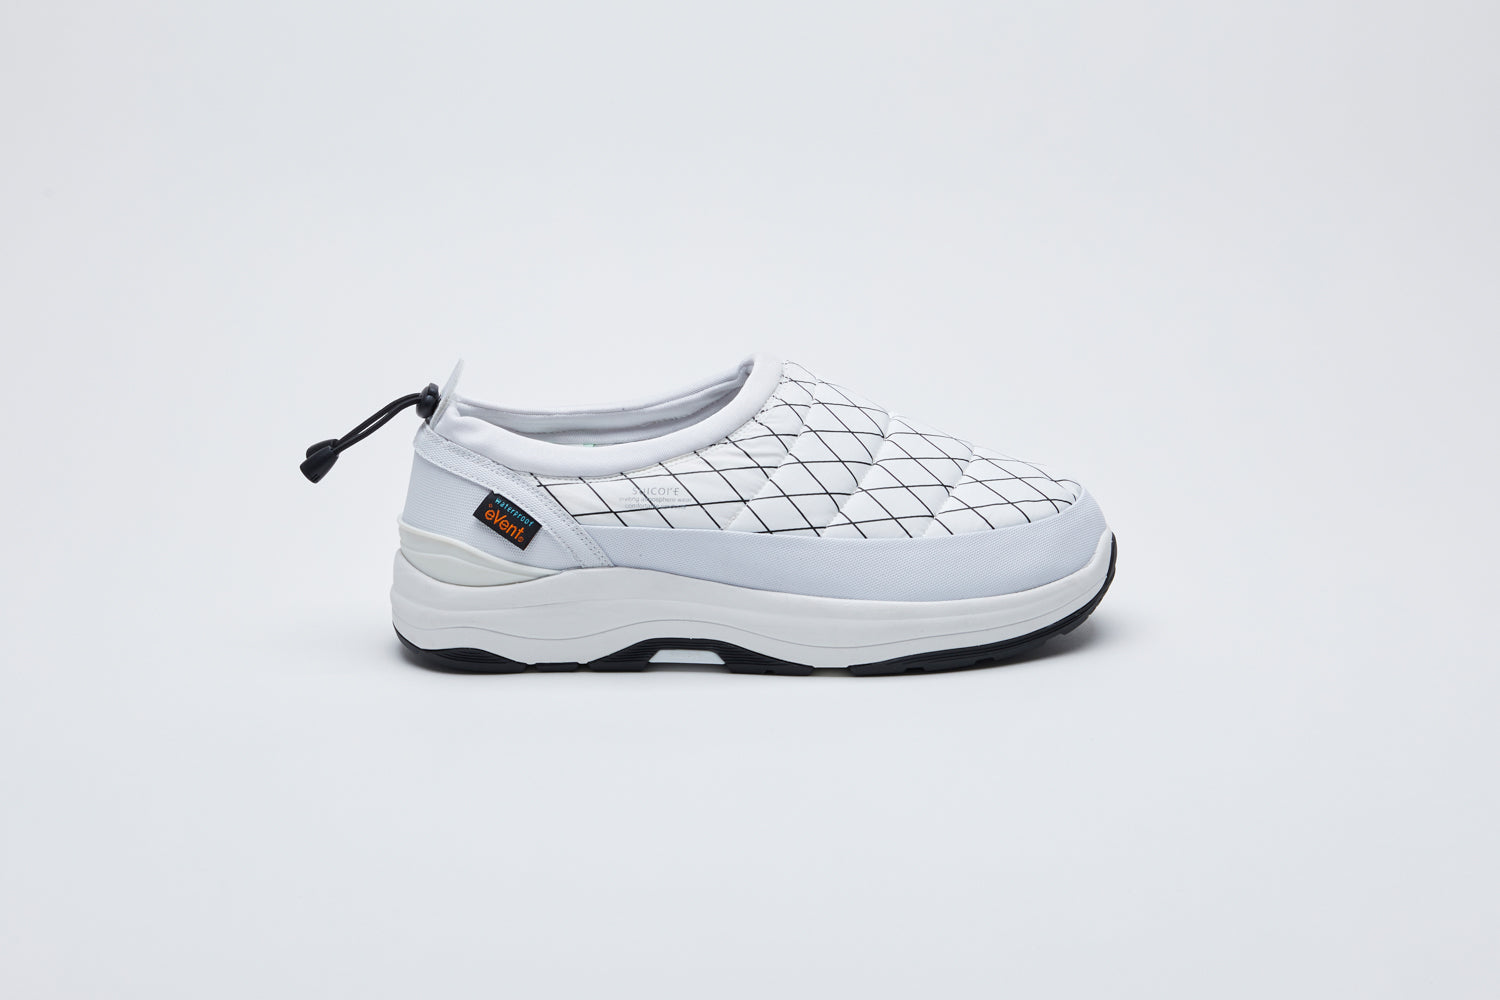 SUICOKE BOWER-evab-PT1 low top ankle boots with white nylon upper with black outlined diamond print and a running sole with adjustable toggle cord closure. From Fall/Winter 2021 collection on SUICOKE Official US &amp; Canada Webstore.